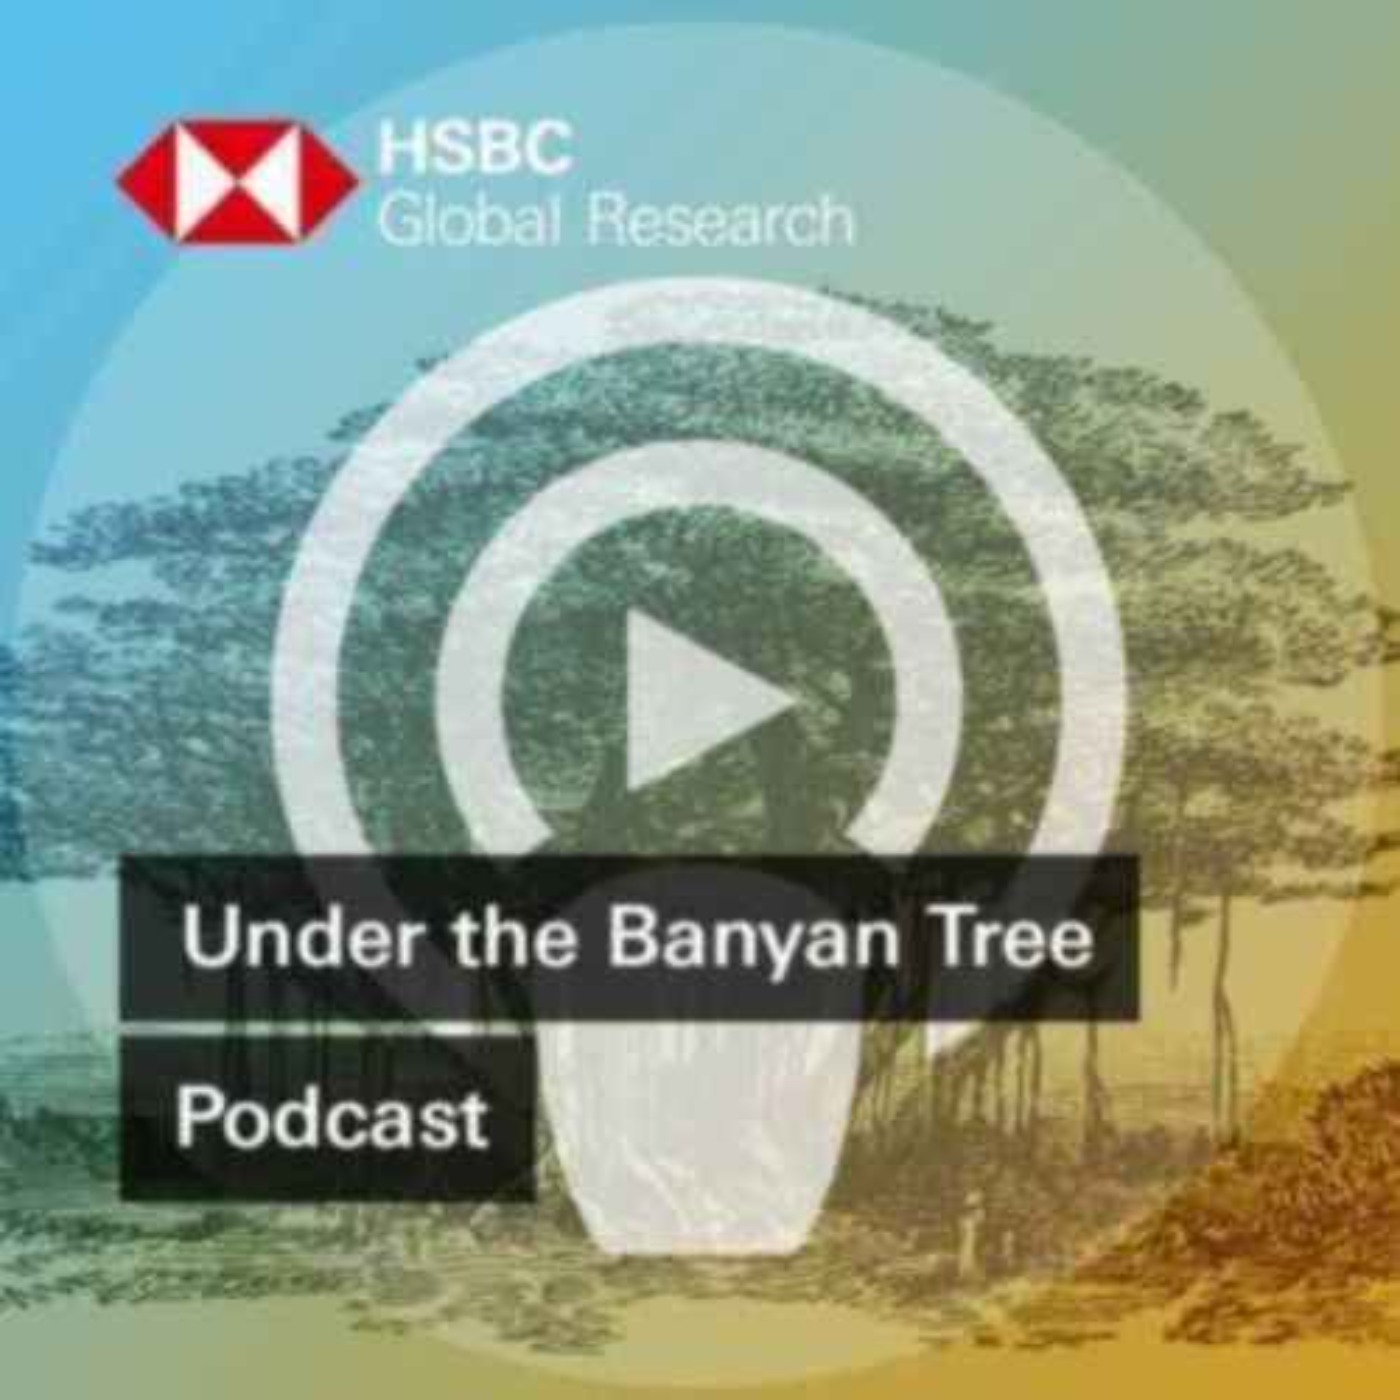 Under the Banyan Tree - China's online retailers are going global